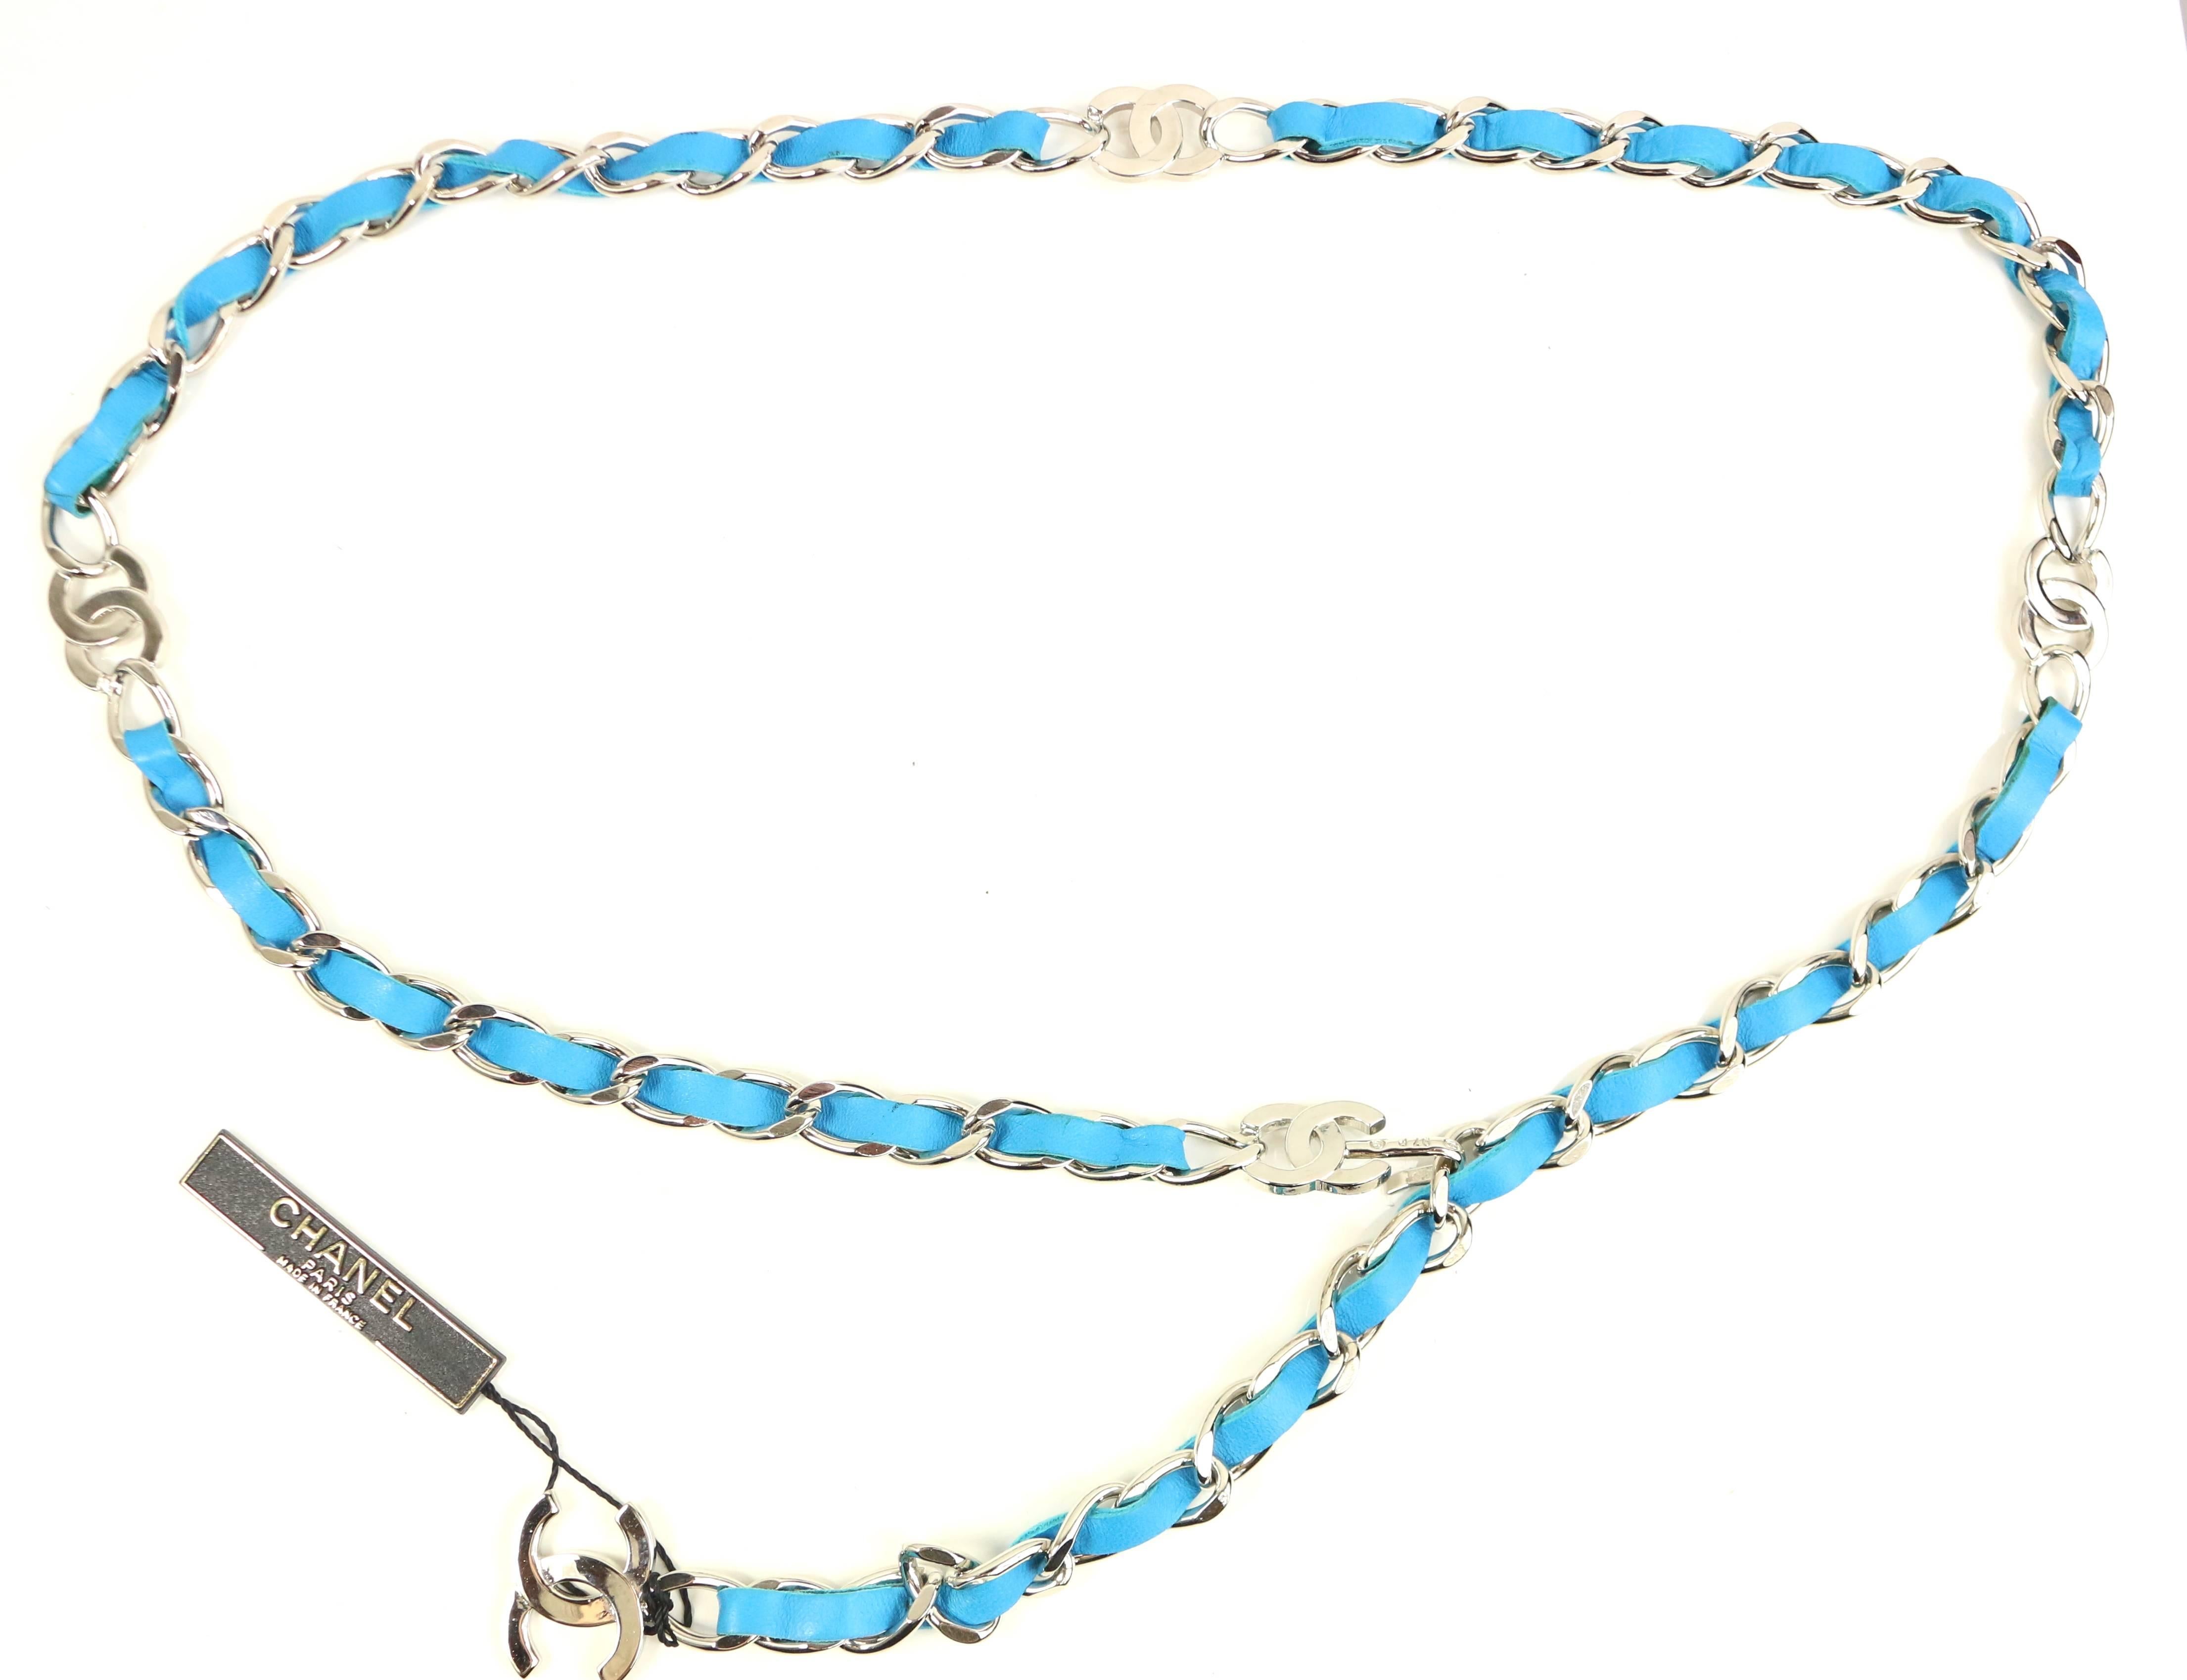 - Vintage 1997 pre collection Chanel turquoise lambskin leather silver chain belt. 

- Silver toned 